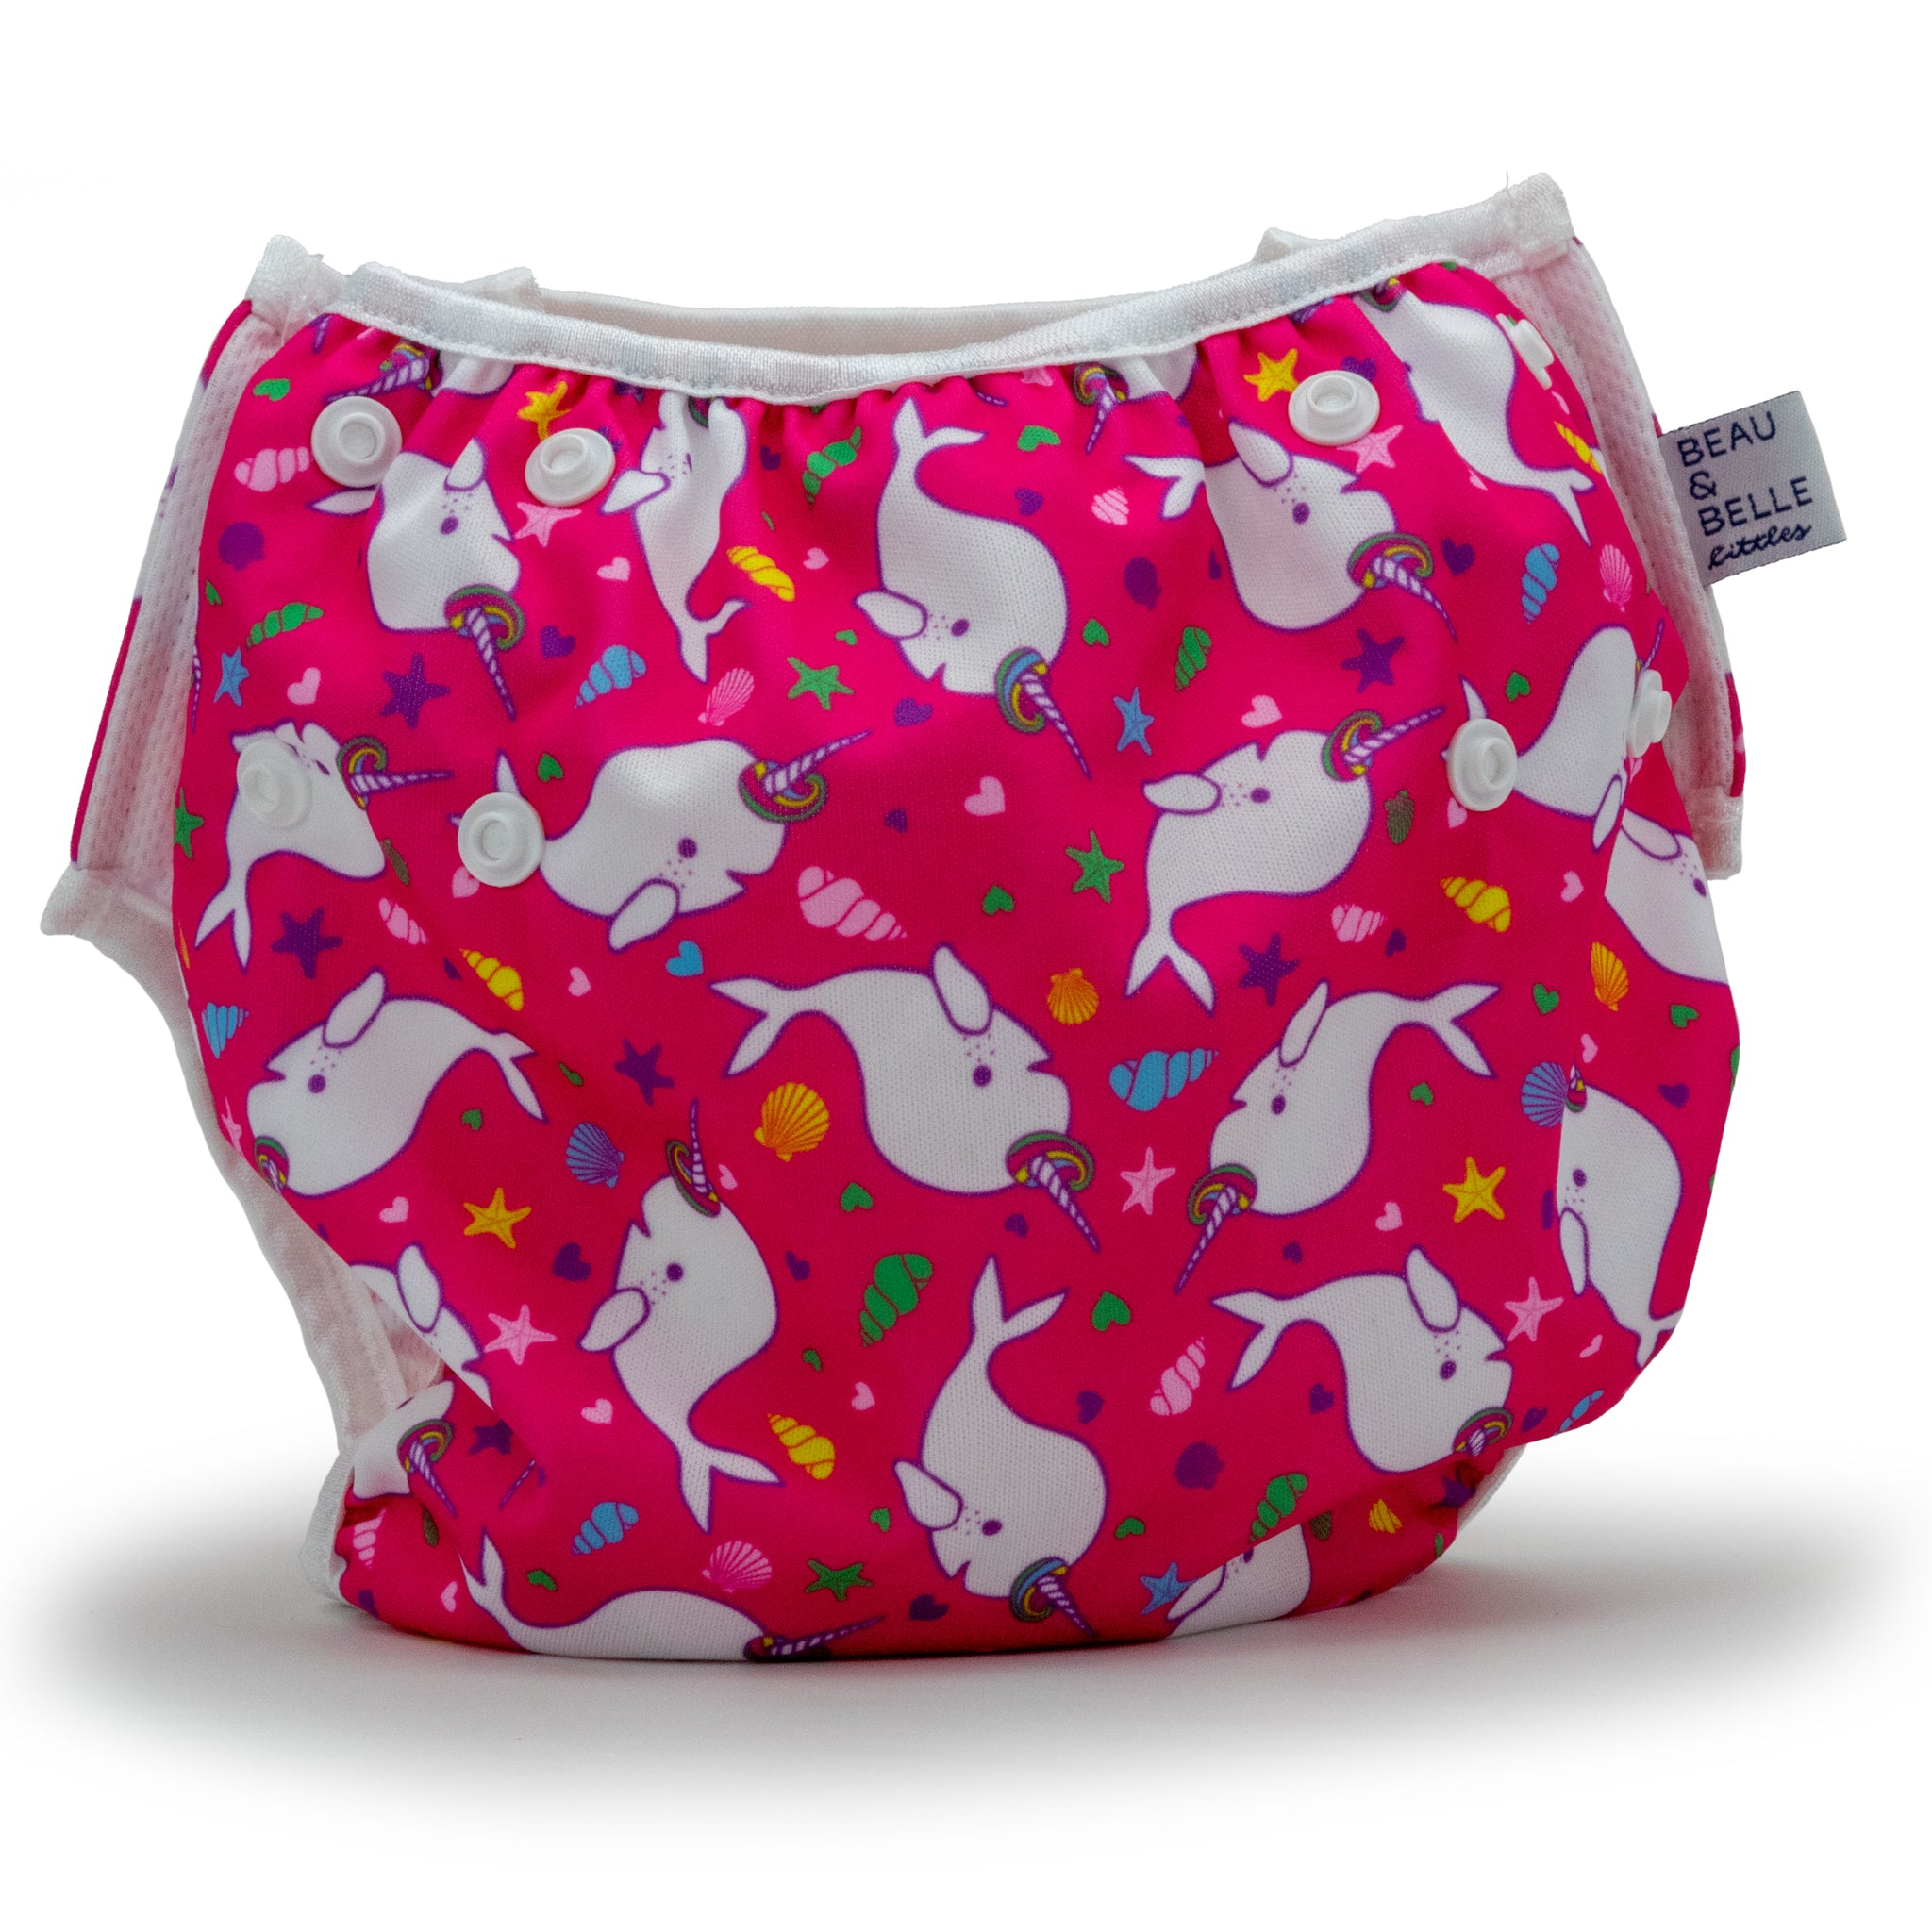 Reusable swim diaper with hot pink narhwal design, rear view, large size.